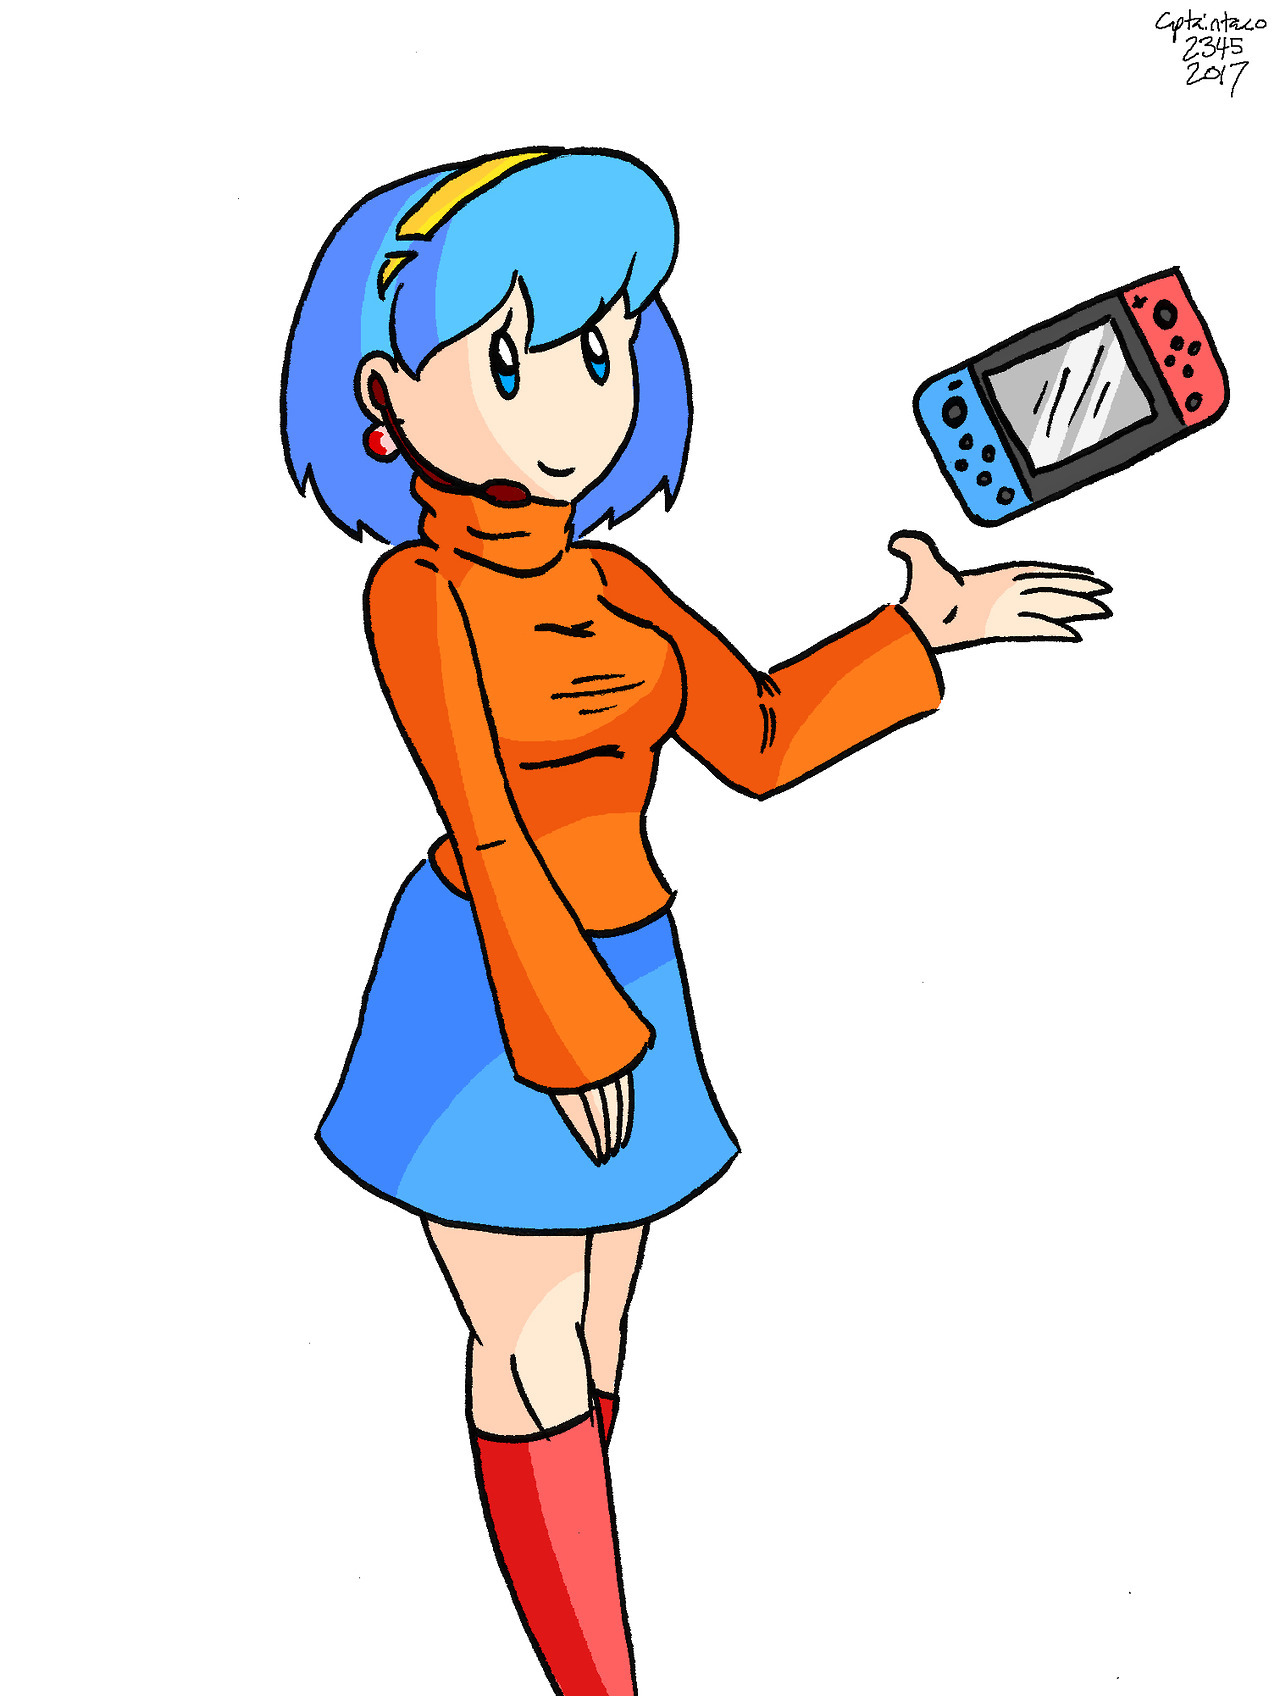 Amelia N, Nintendo’s UI mascot for the Switch. I’ve done some NSFW fanart of